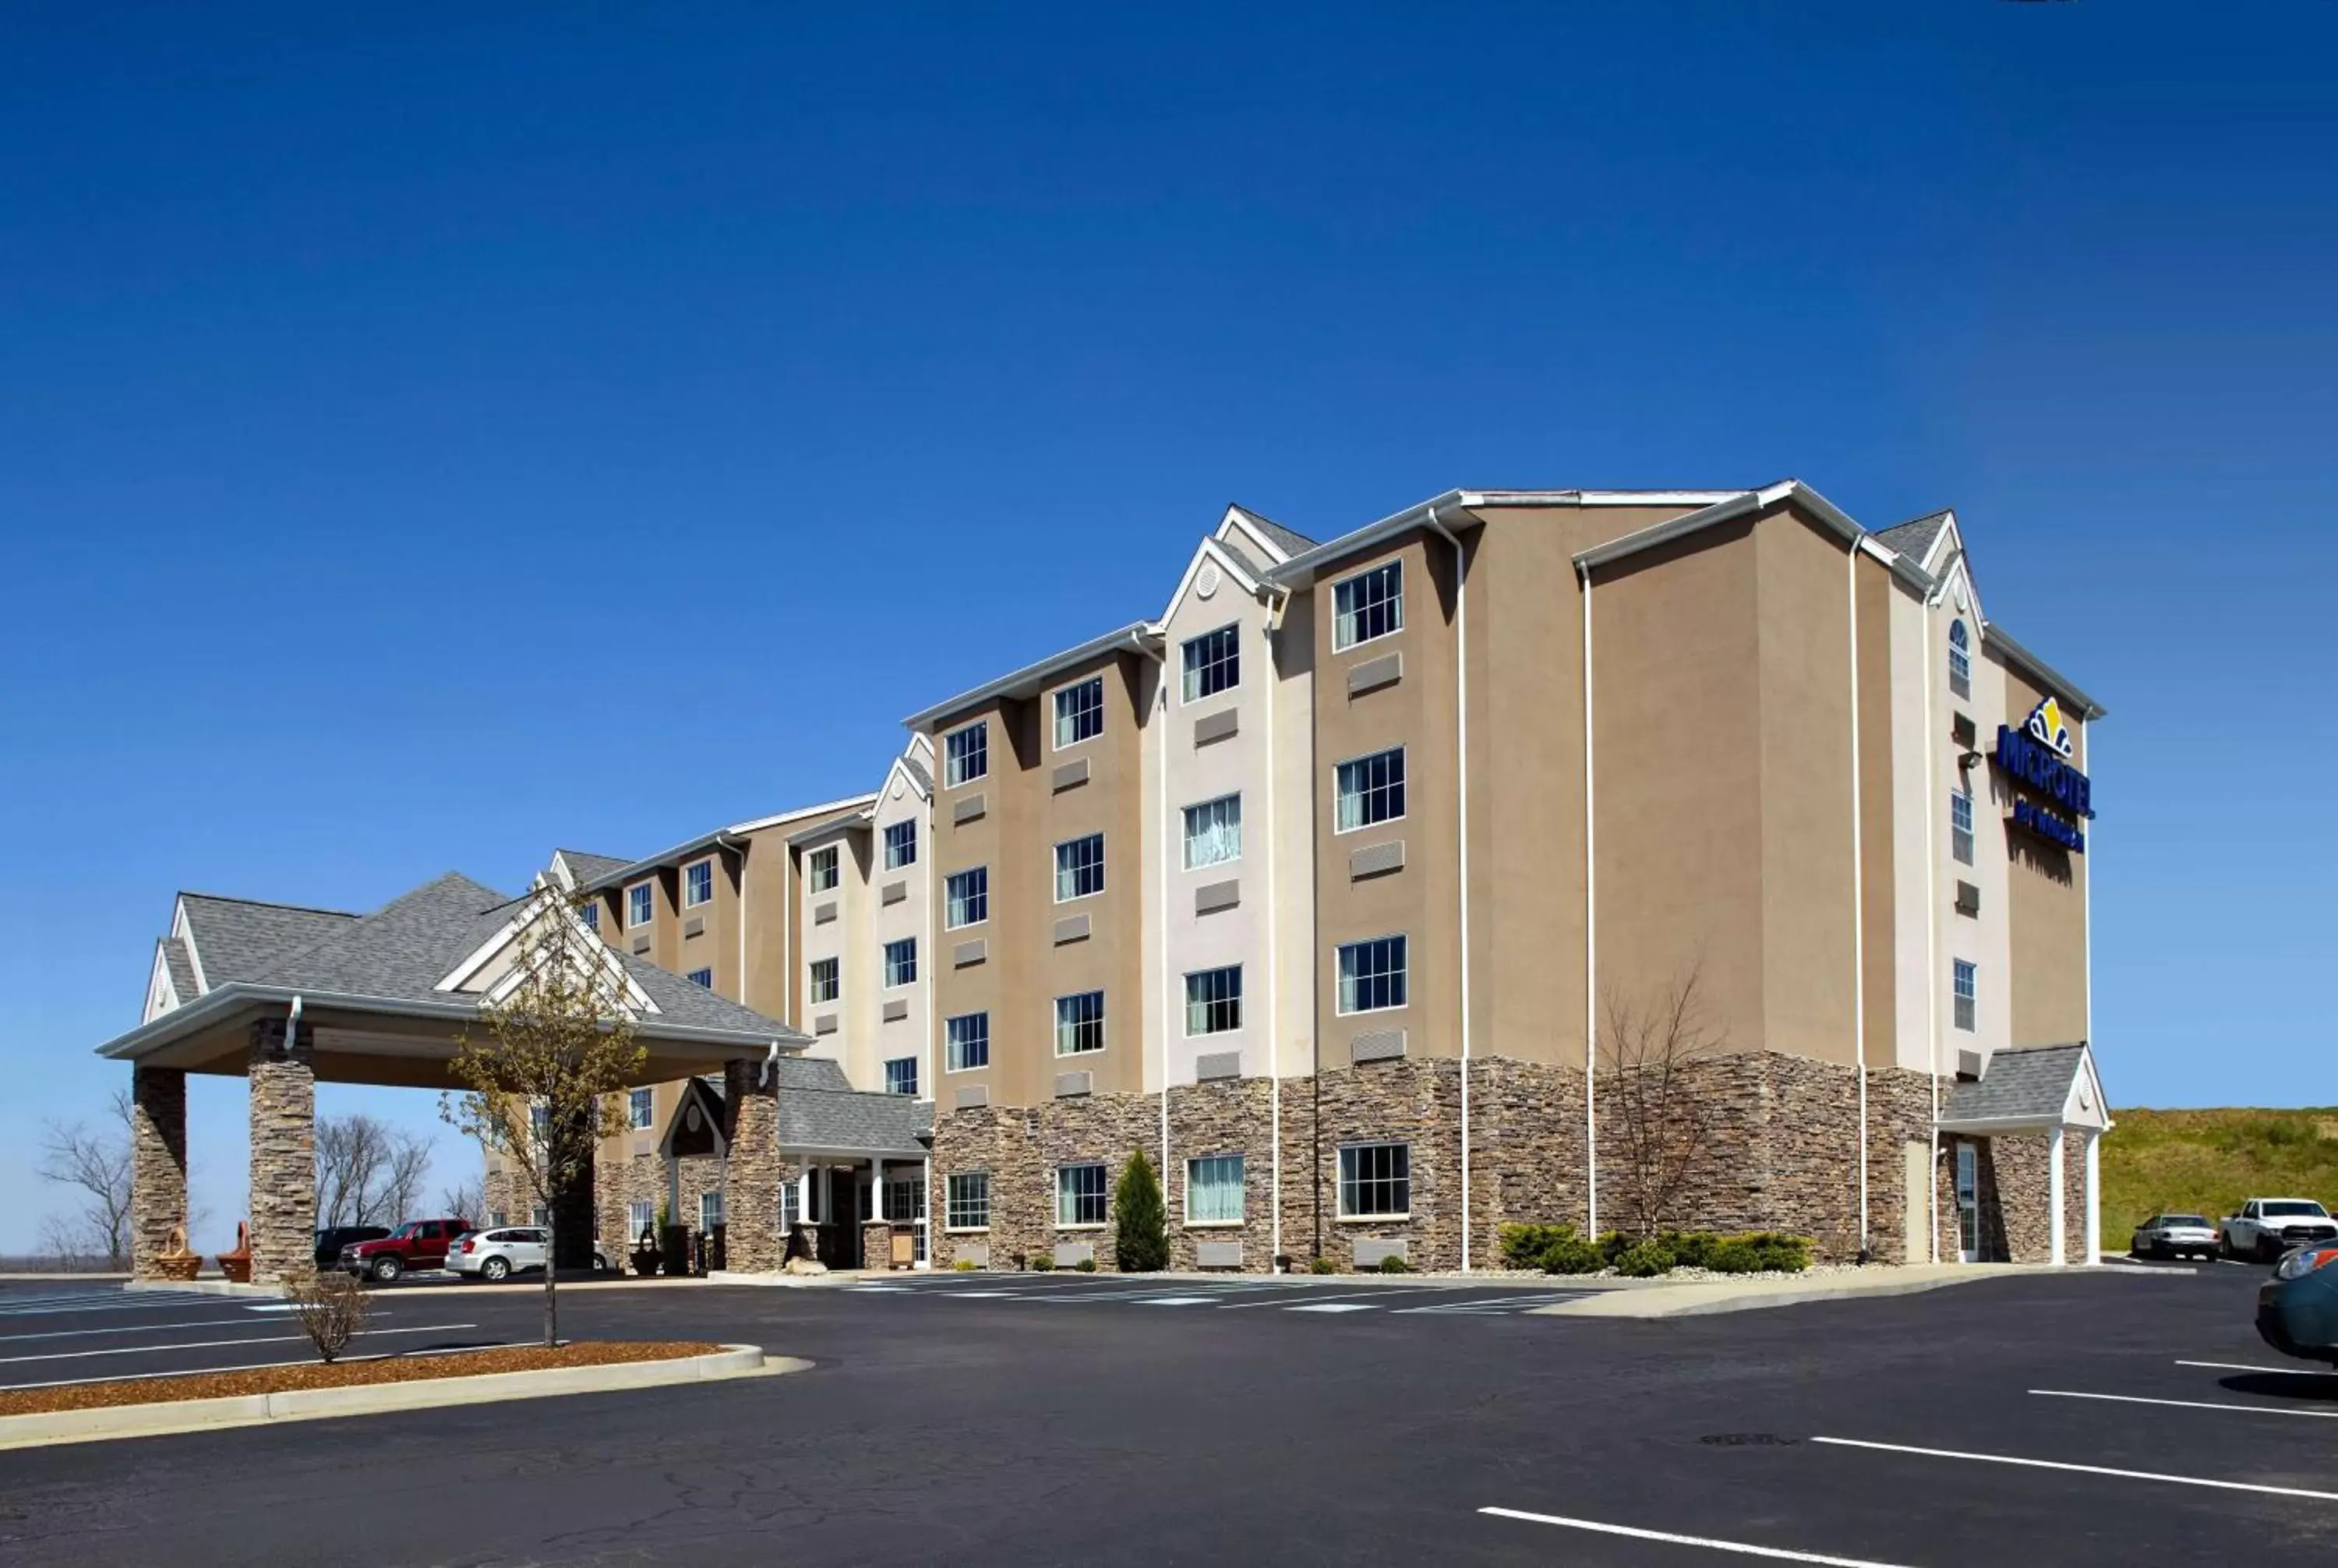 Property Building in Microtel Inn & Suites - St Clairsville